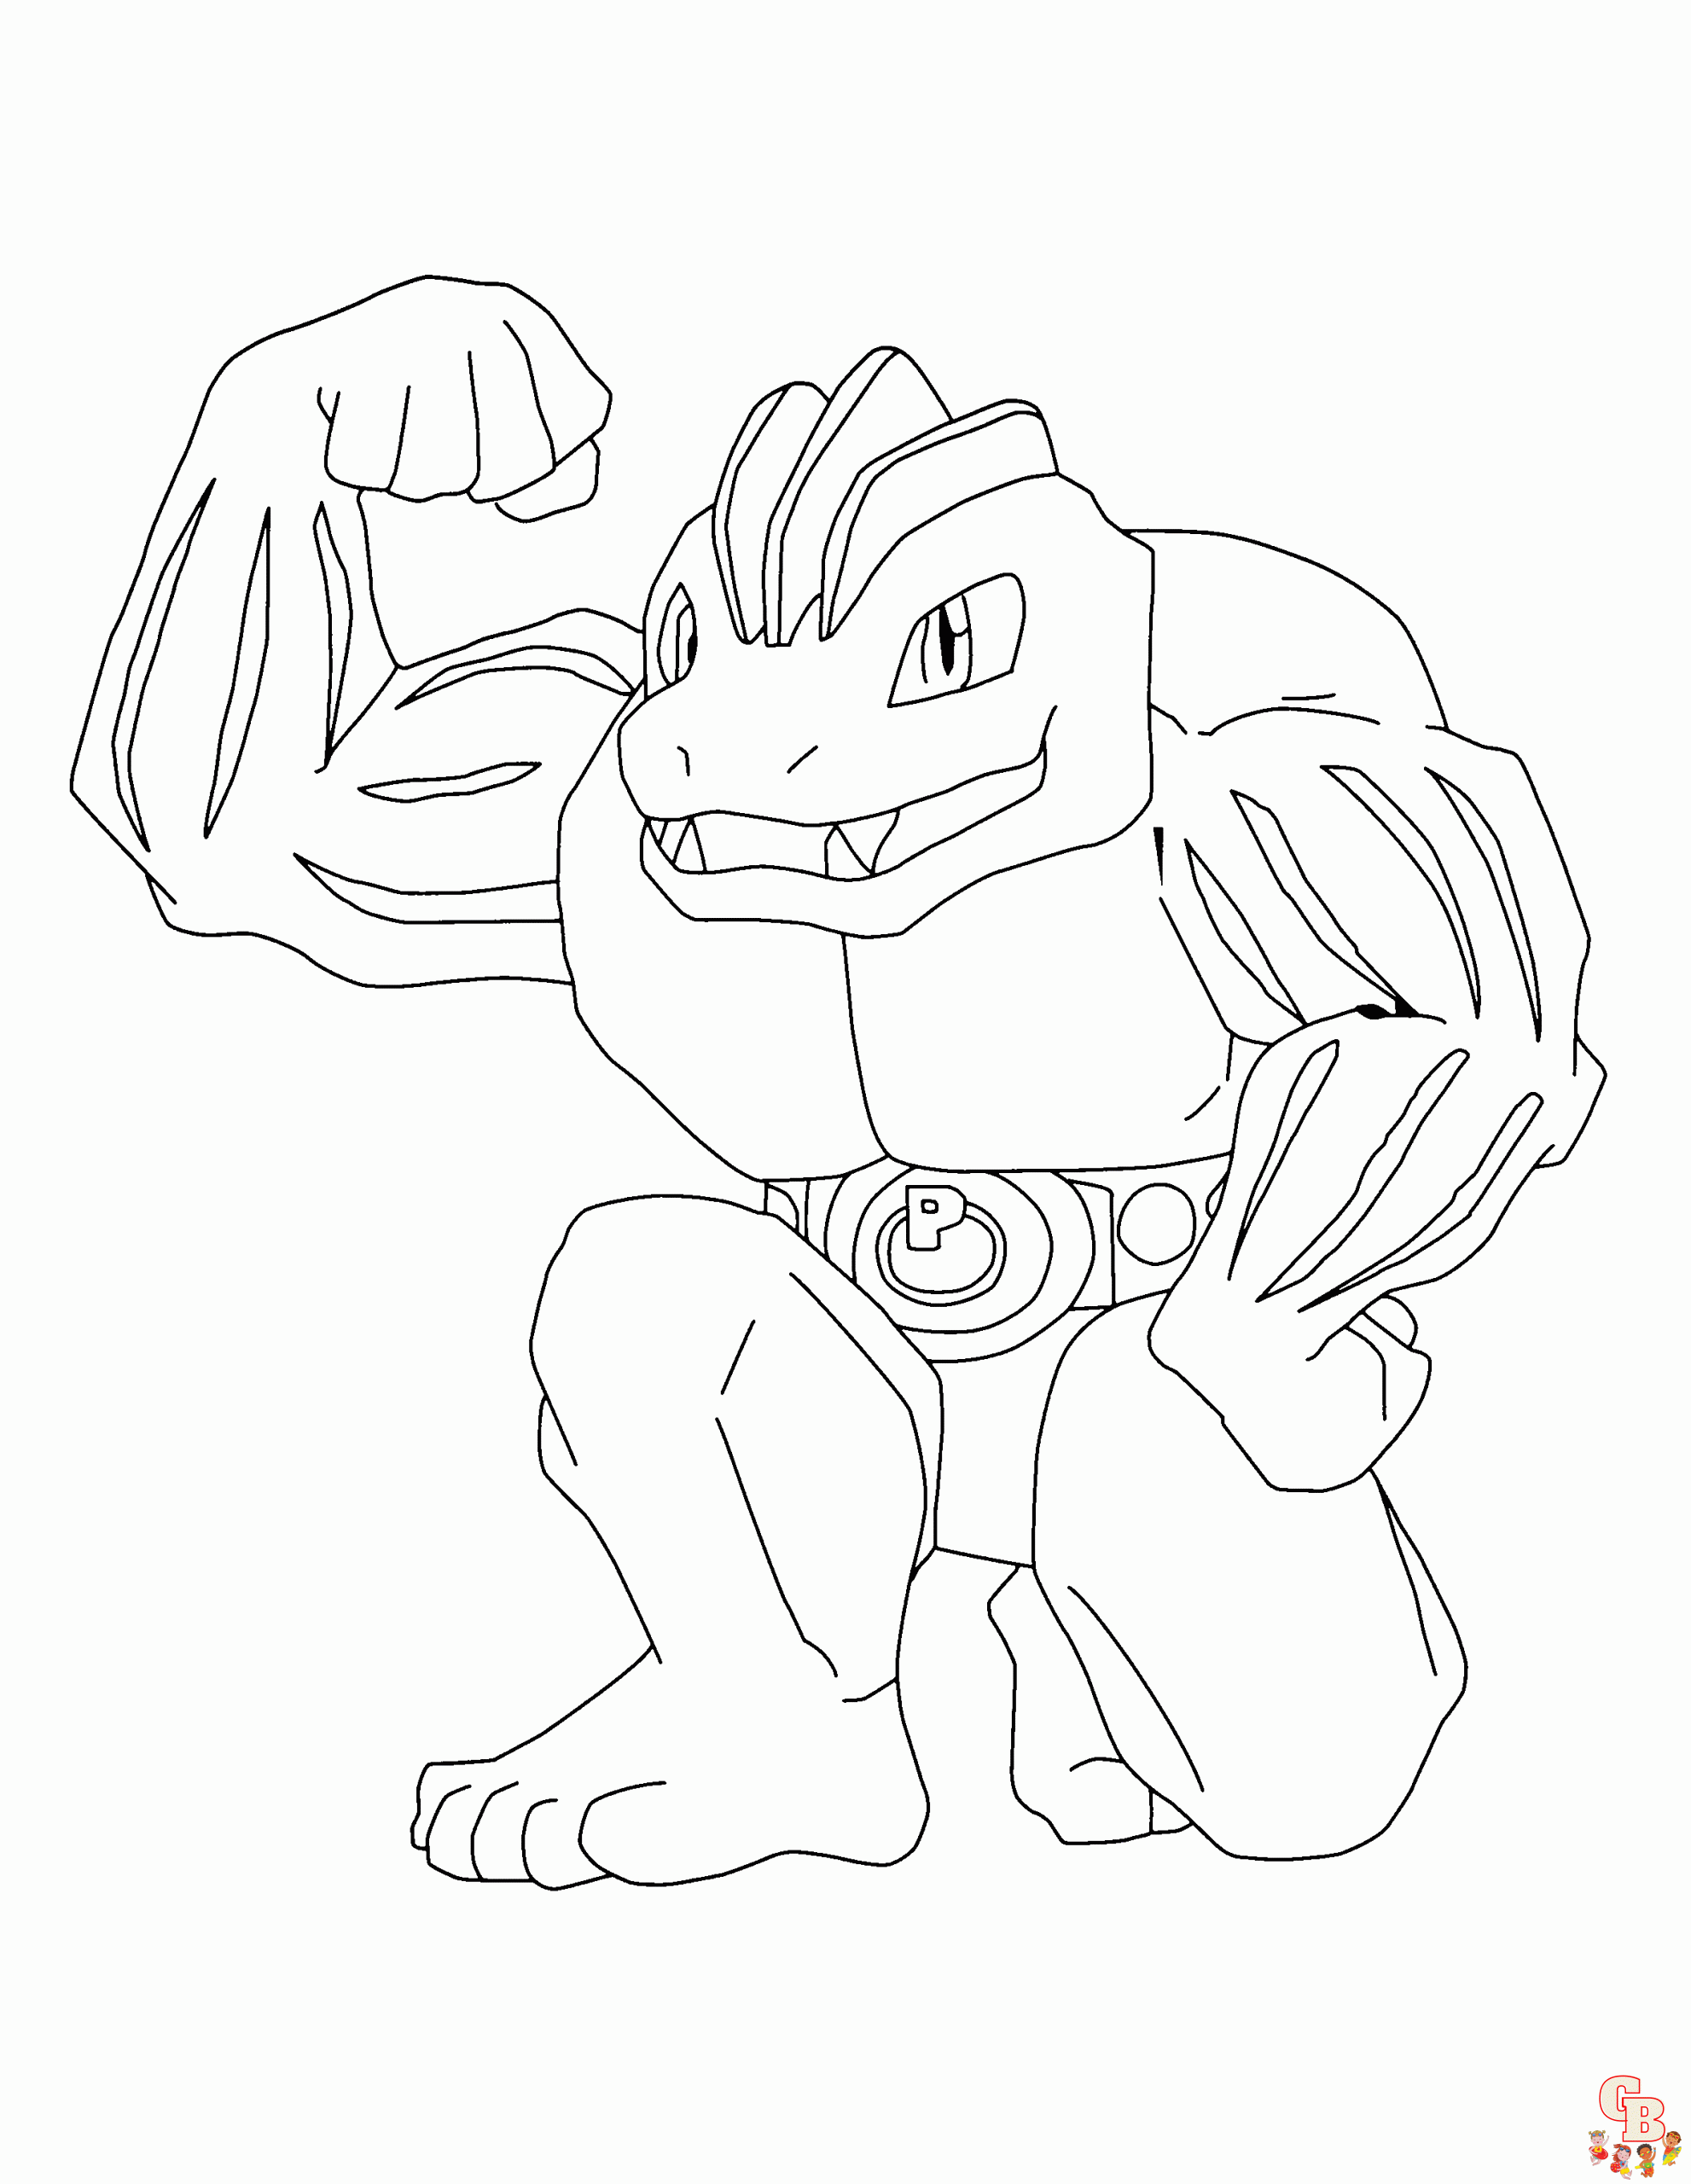 Coloring Fun with Machoke Coloring Pages: Free Printable